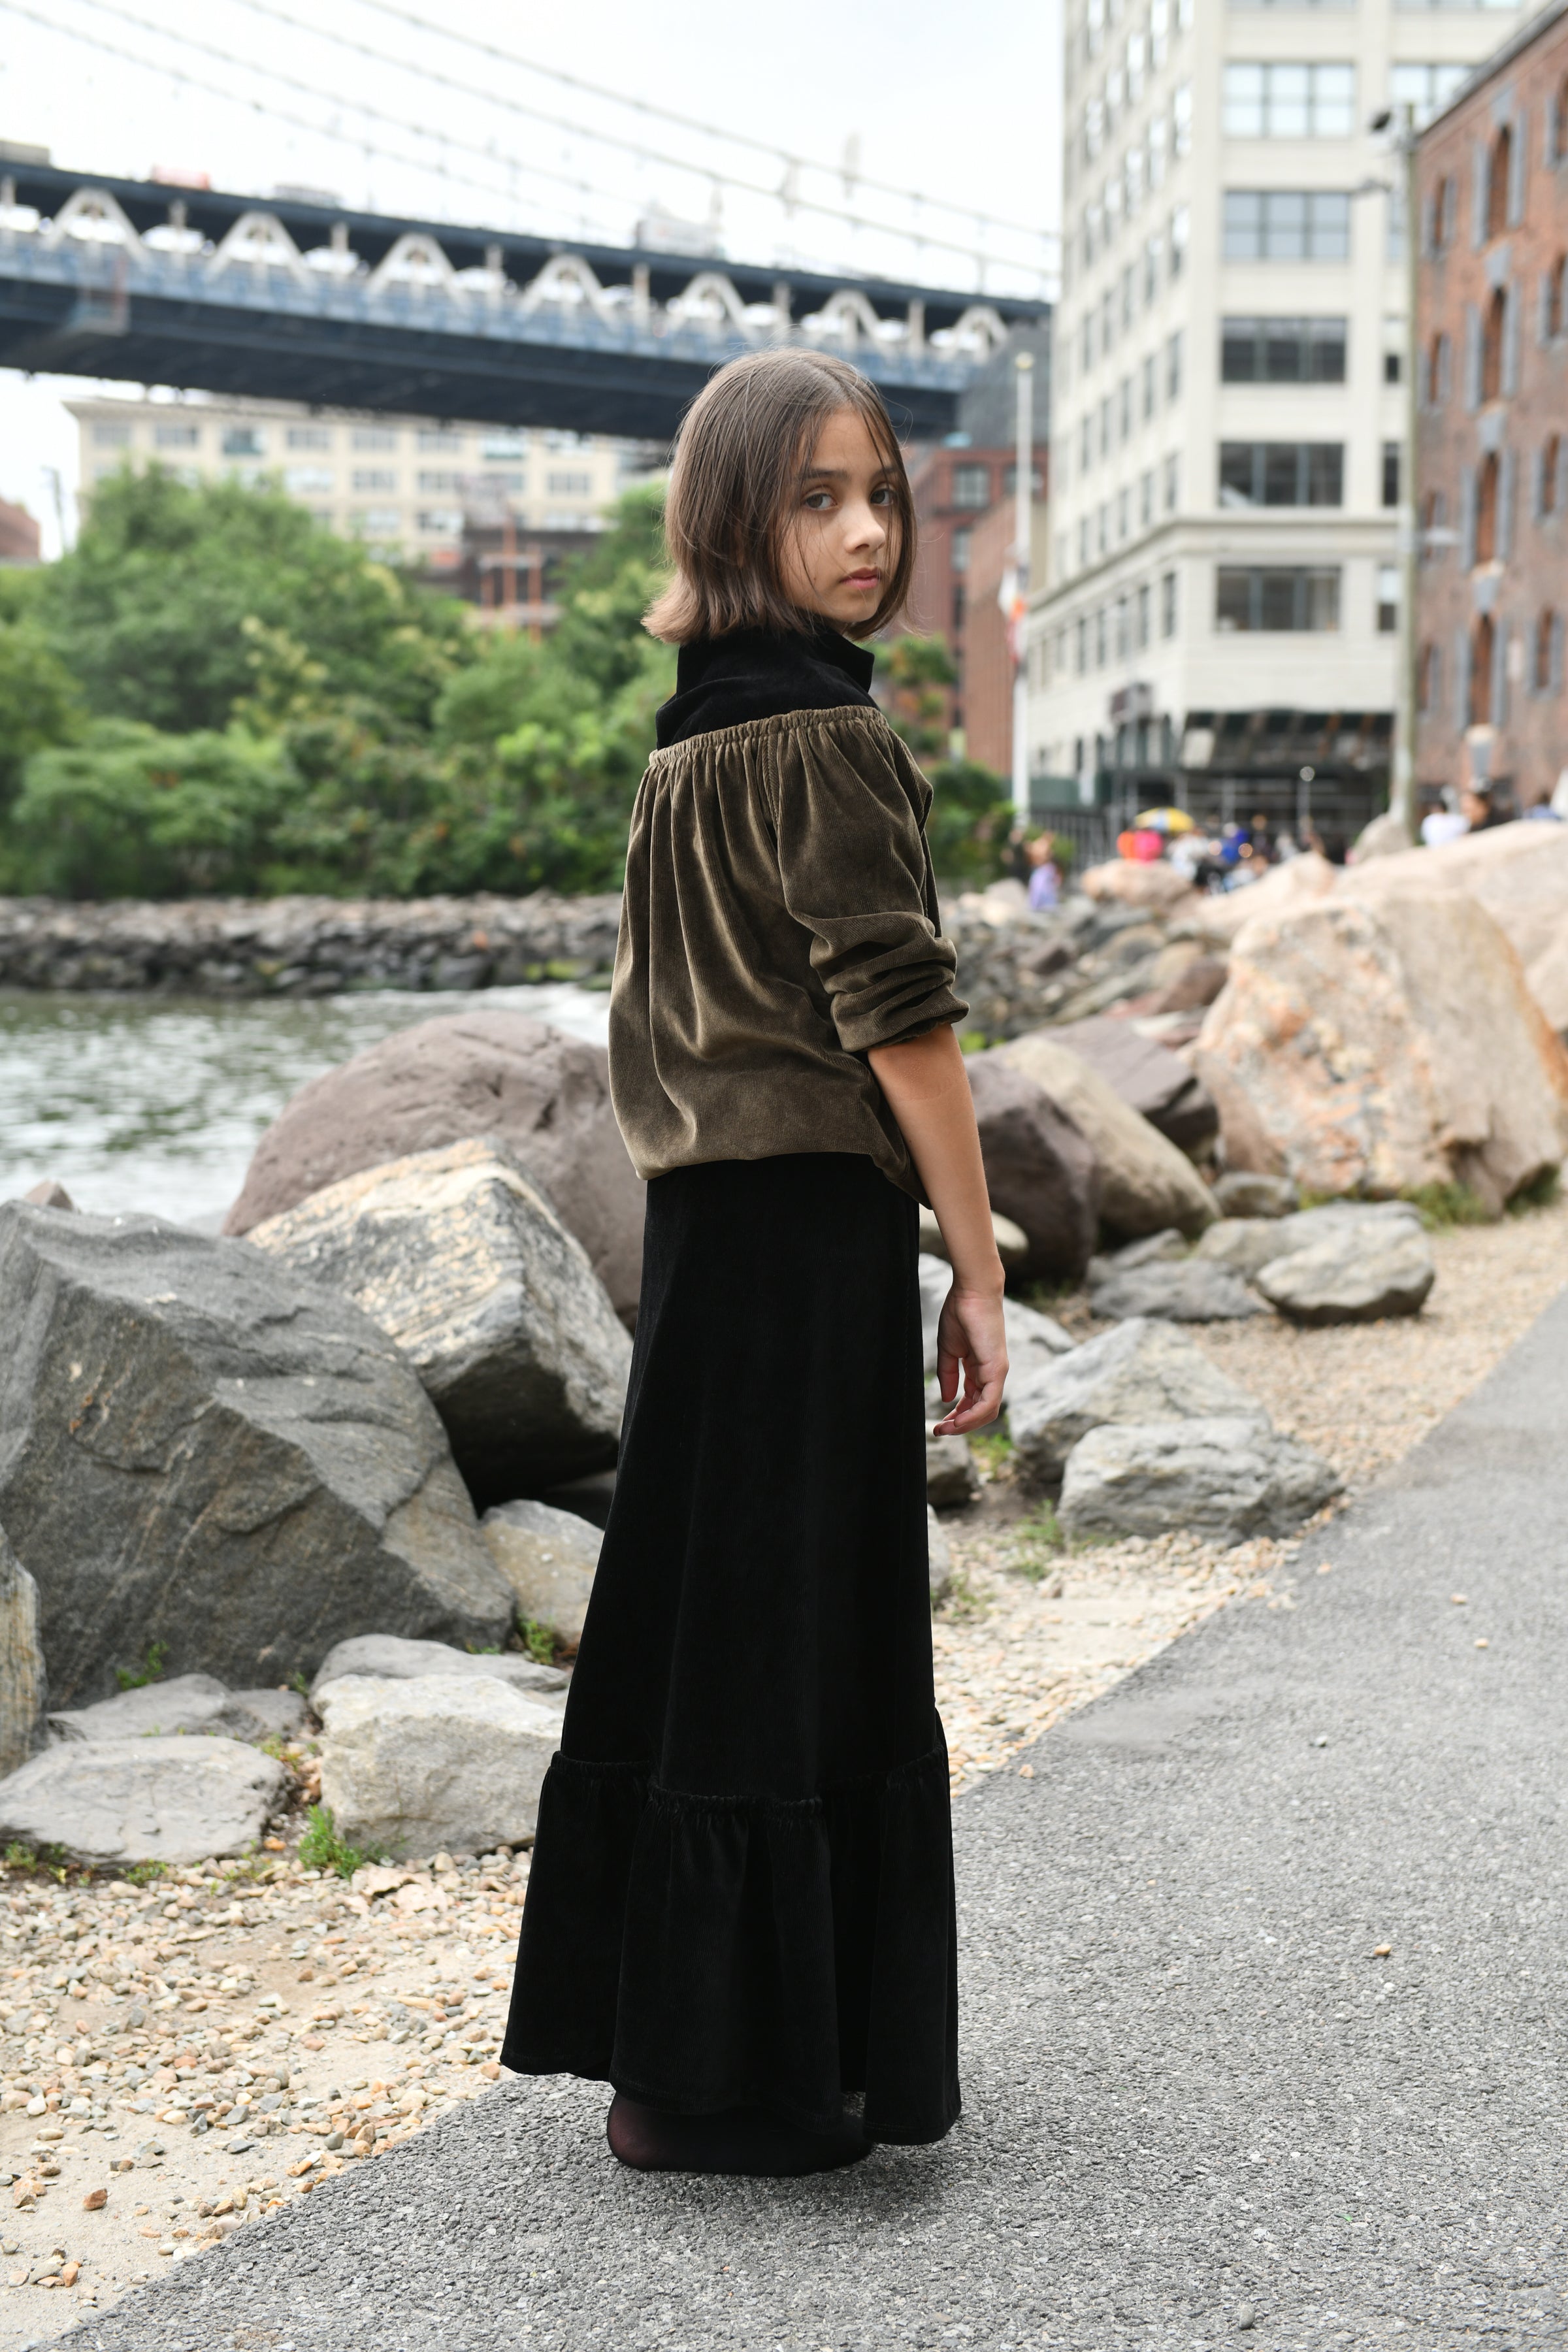 Top + Maxi Skirt in Black/Olive Green